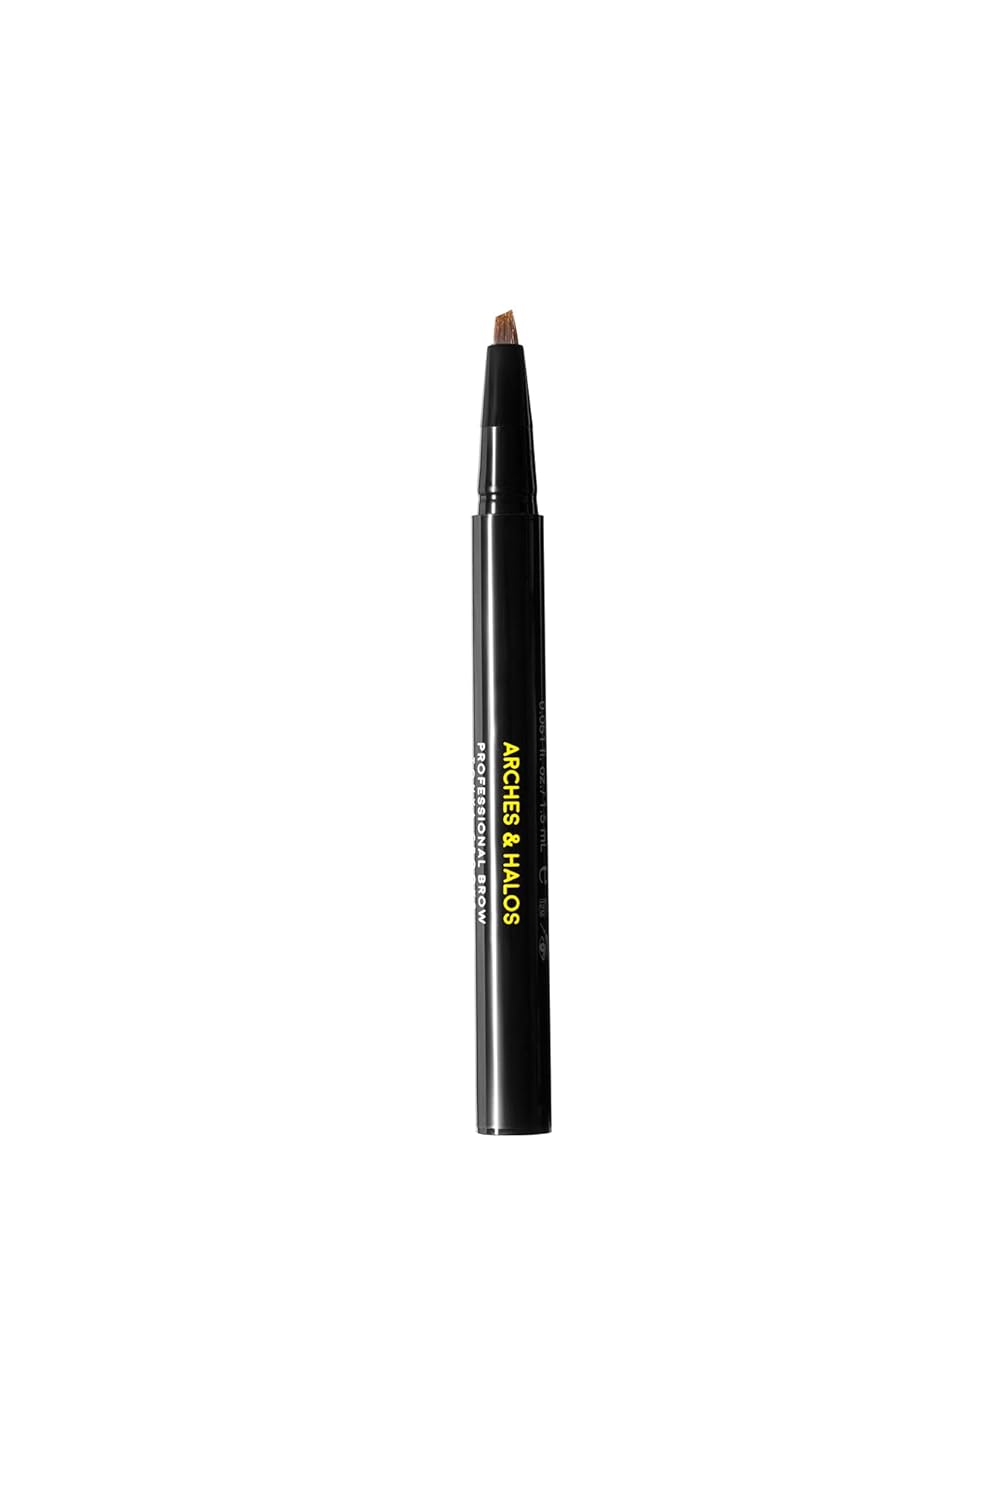 Arches & Halos Angled Bristle Tip Waterproof Brow Pen - Water Based And Smudge Proof - Fills In Sparse Eyebrows And Gives Fuller Effect - Covers Scars Or Overplucked Brows - Sunny Blonde - 0.051